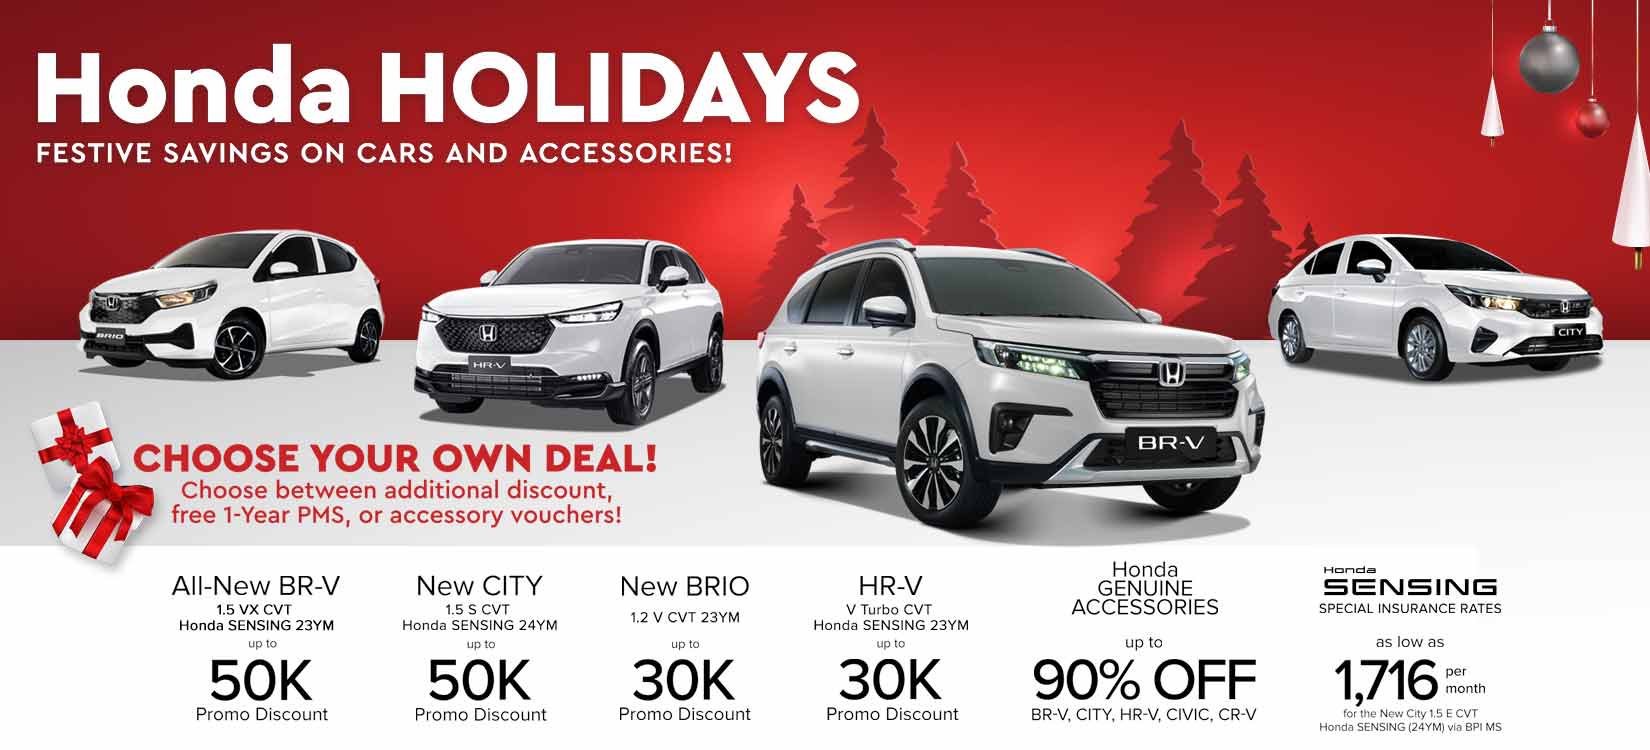 Honda Cars PH celebrates the Holidays with “Choose Your Own Deal for the All-New BR-V, New Brio, New City and New Civic”